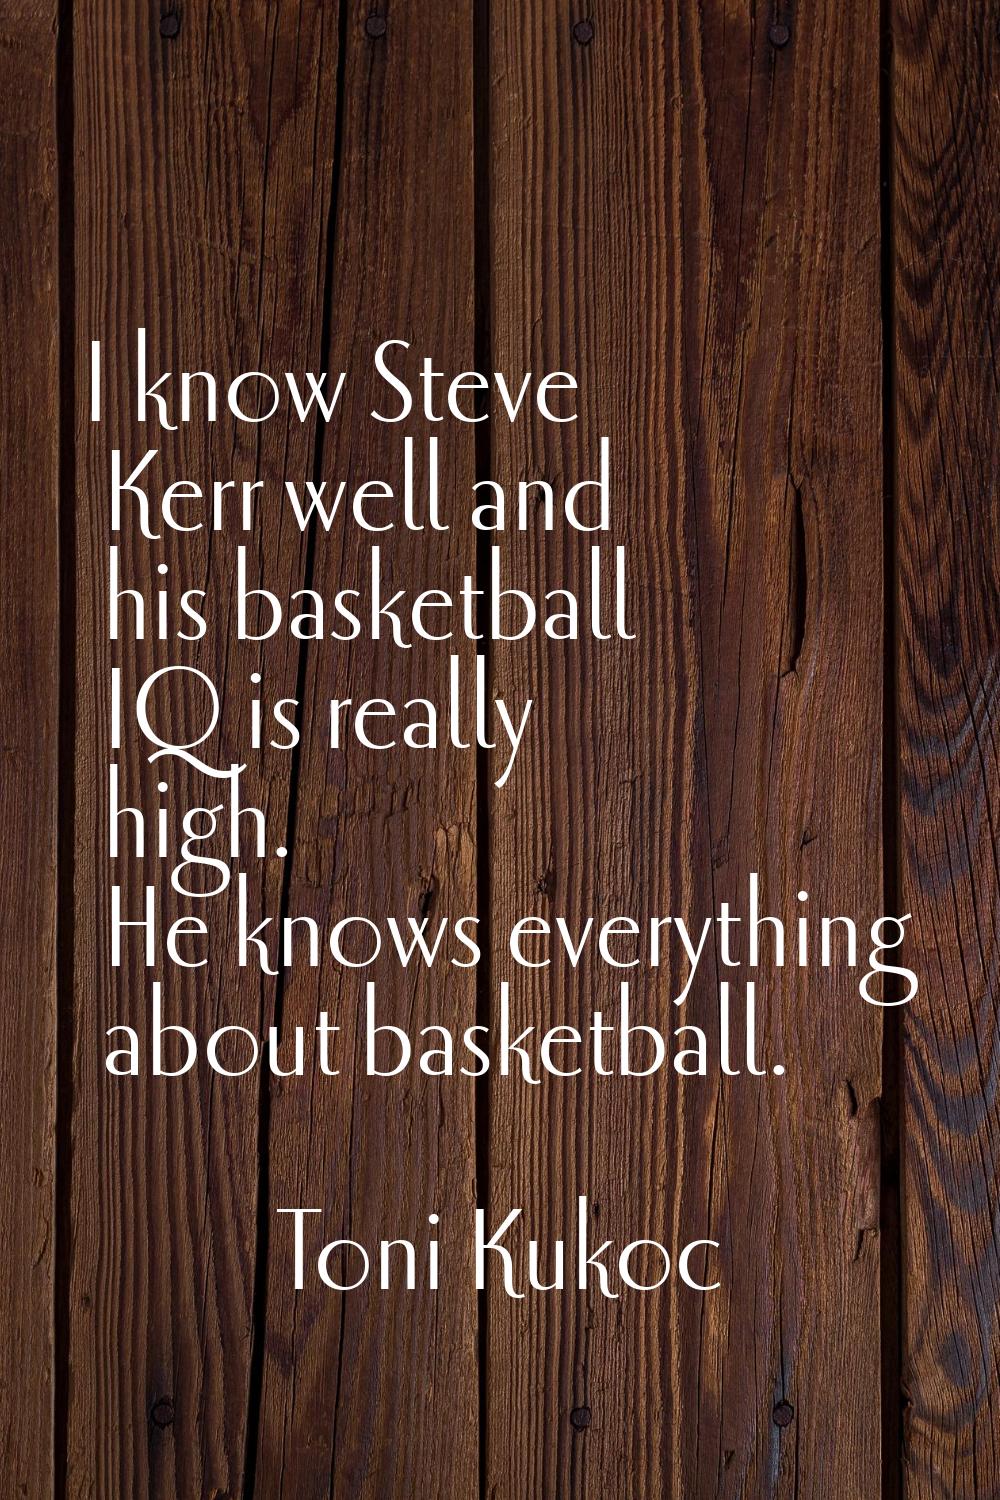 I know Steve Kerr well and his basketball IQ is really high. He knows everything about basketball.